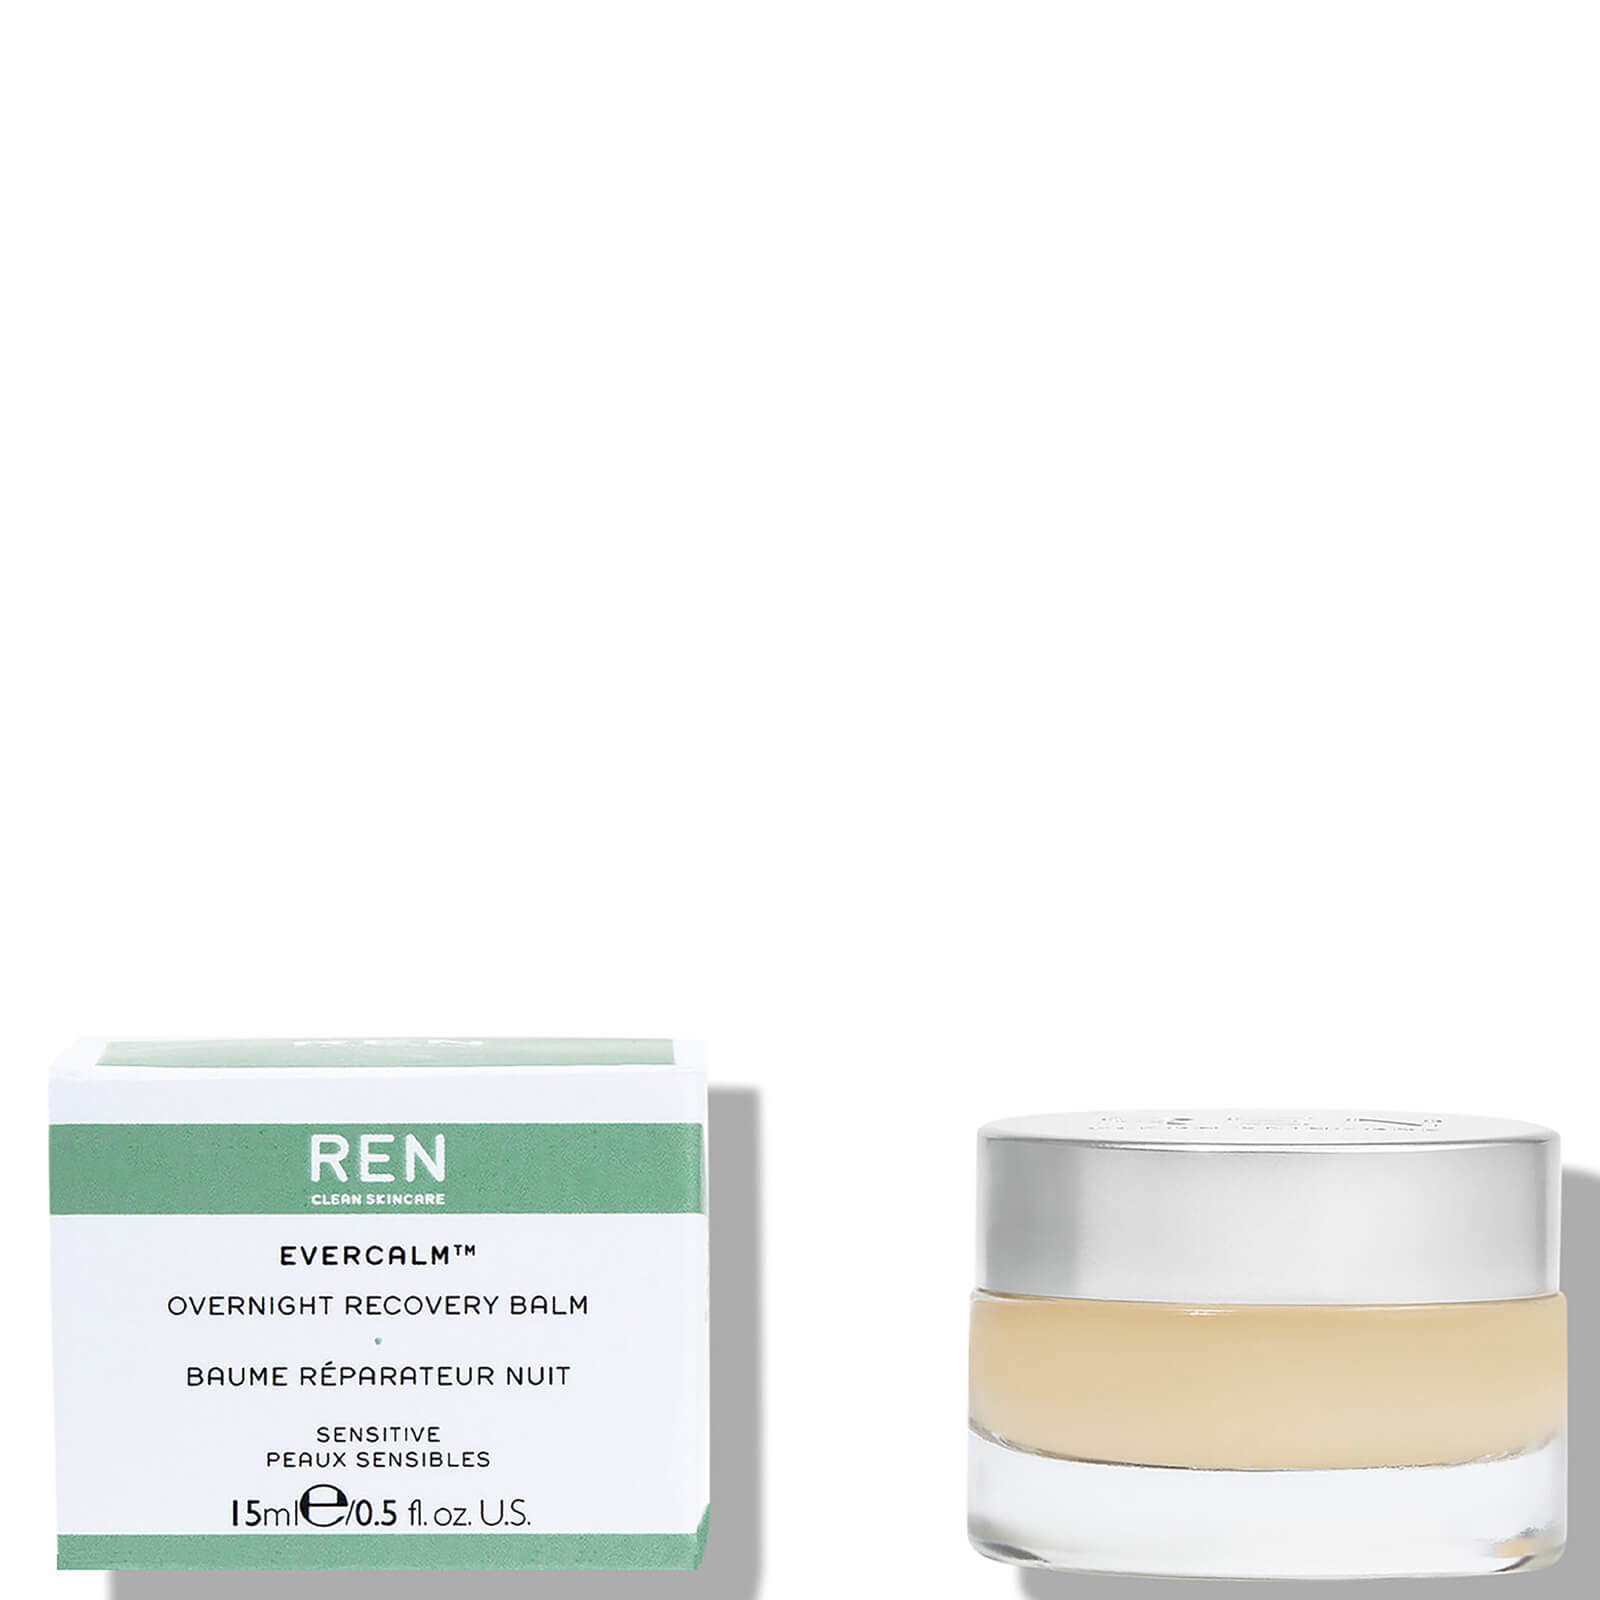 Image of REN Clean Skincare Evercalm Overnight Recovery Balm 15ml